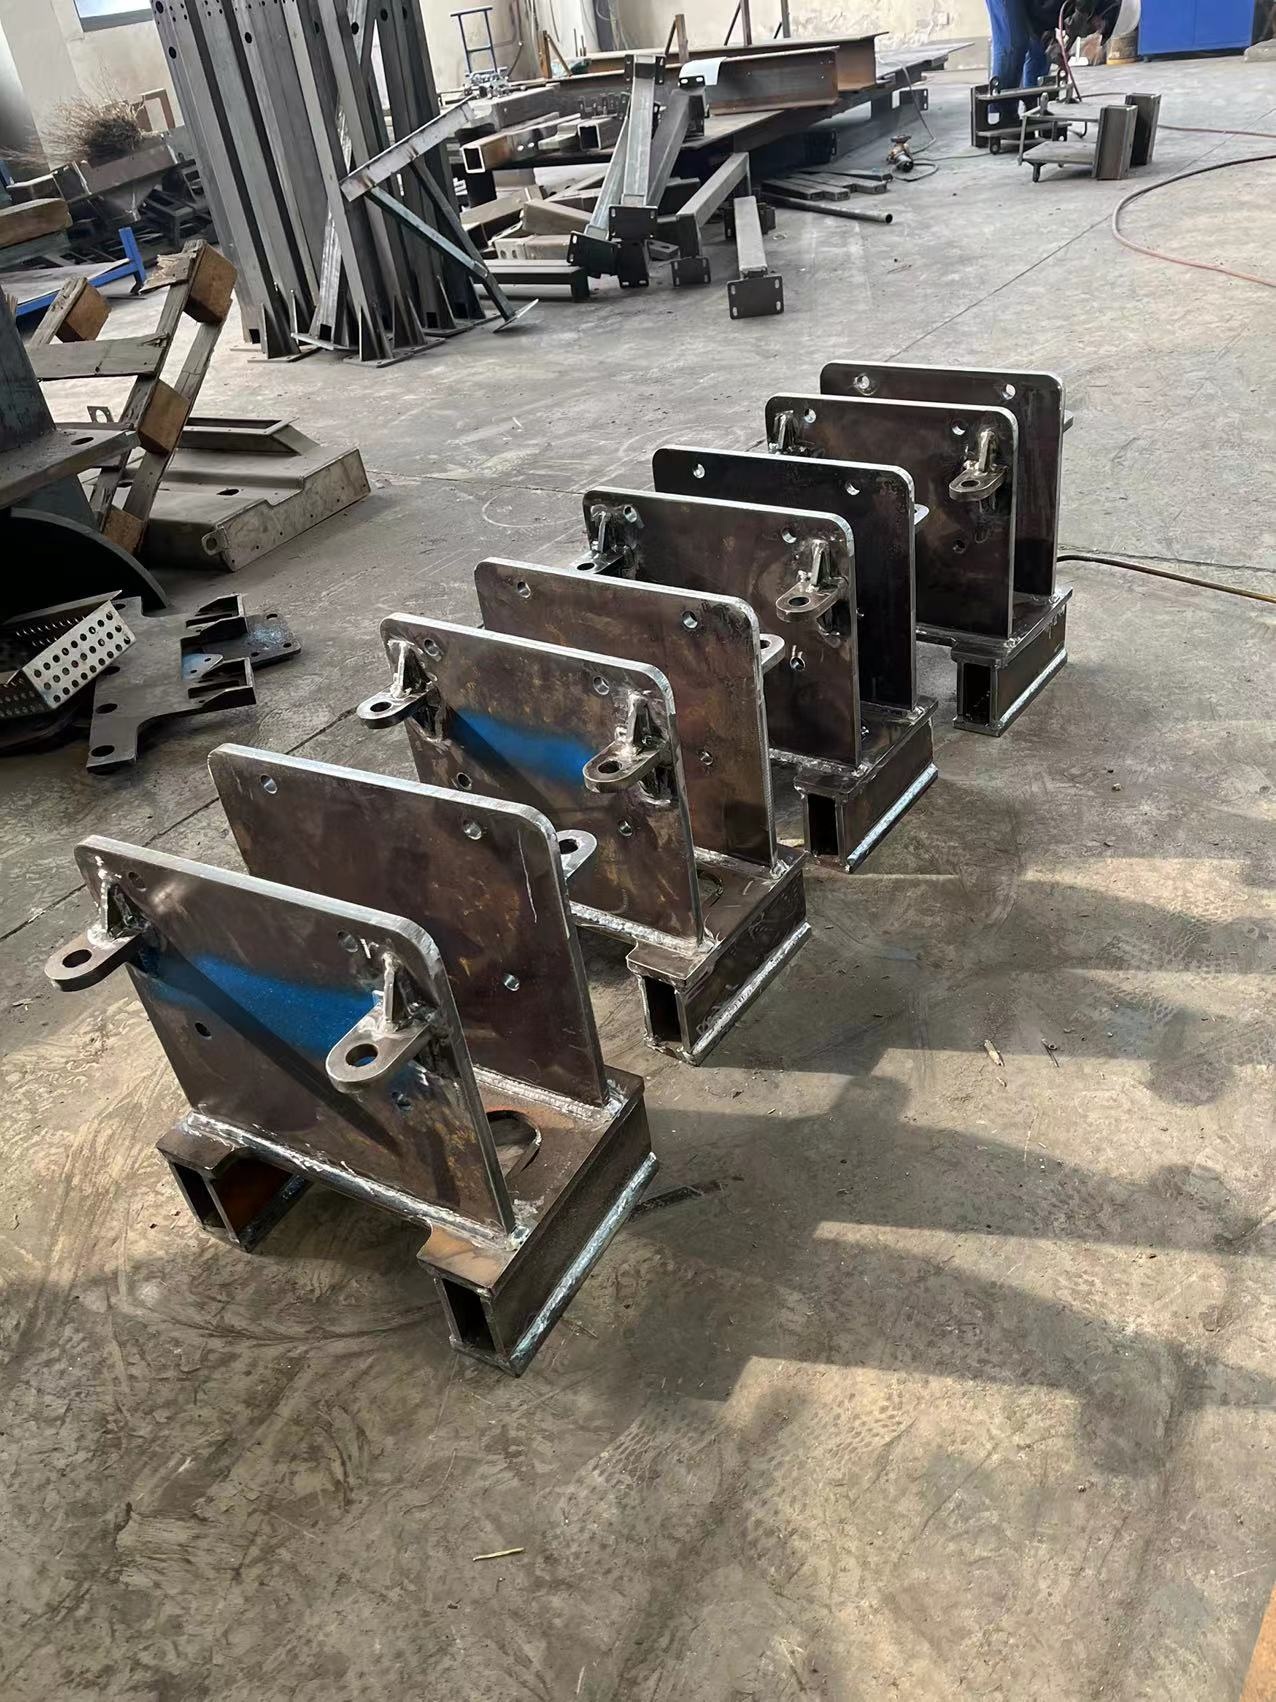 Large dimension metal works fabrication bending welding machined construction parts welding frame assembly welding fabrication